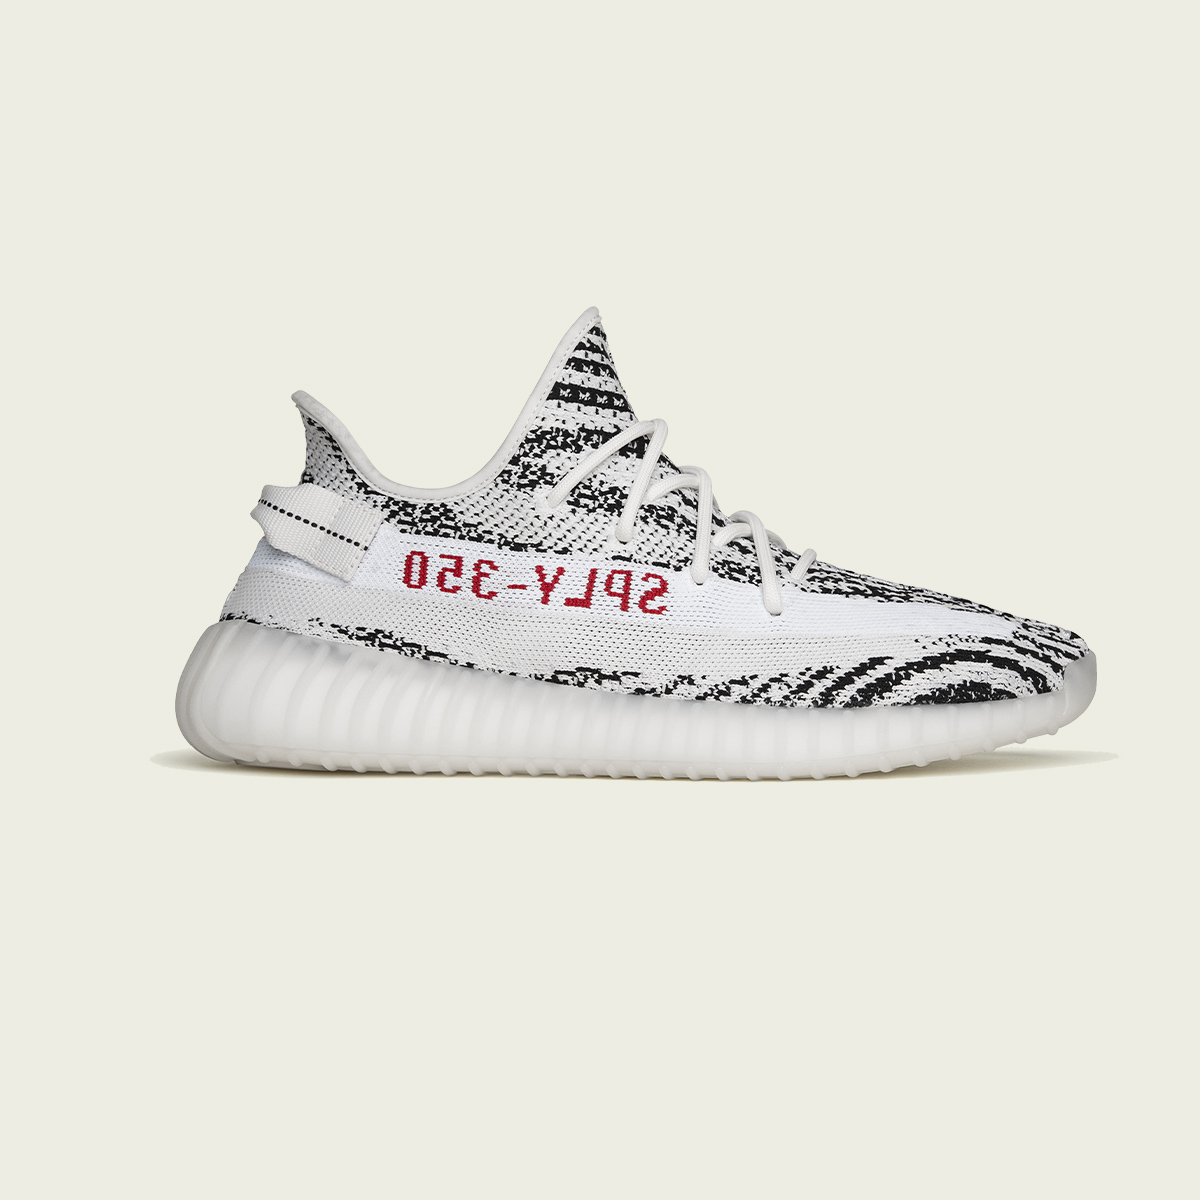 Foot Locker on Twitter: "#YEEZY BOOST 350 V2 LAUNCHES APRIL MEN'S SIZES. Reservations are now open via the Foot Locker App. https://t.co/Ic42omPHXP" / Twitter